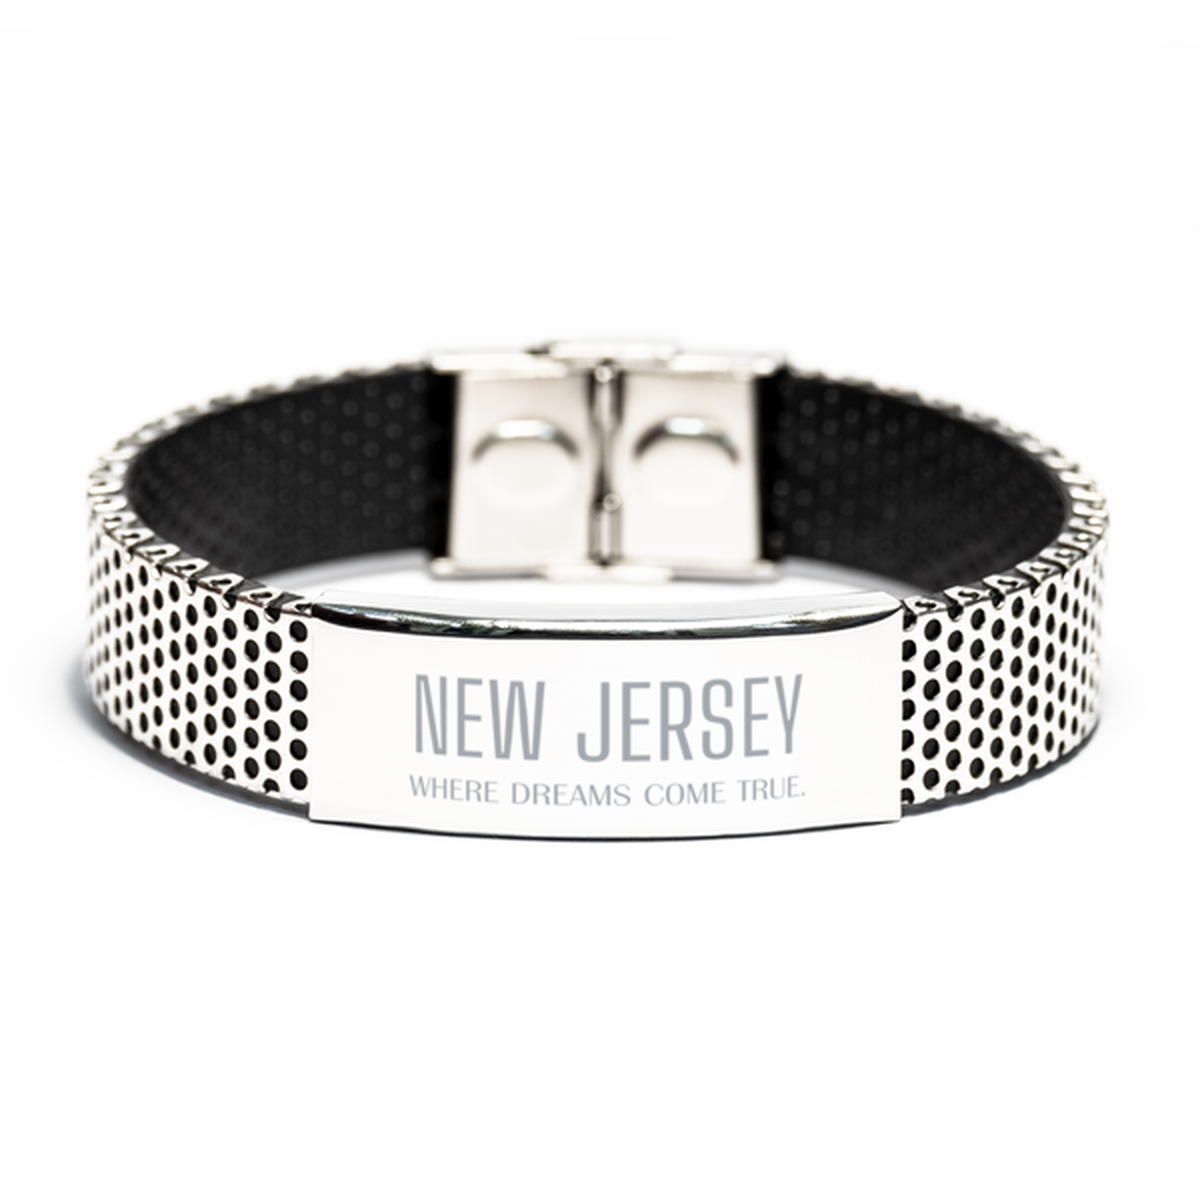 Love New Jersey State Stainless Steel Bracelet, New Jersey Where dreams come true, Birthday Inspirational Gifts For New Jersey Men, Women, Friends